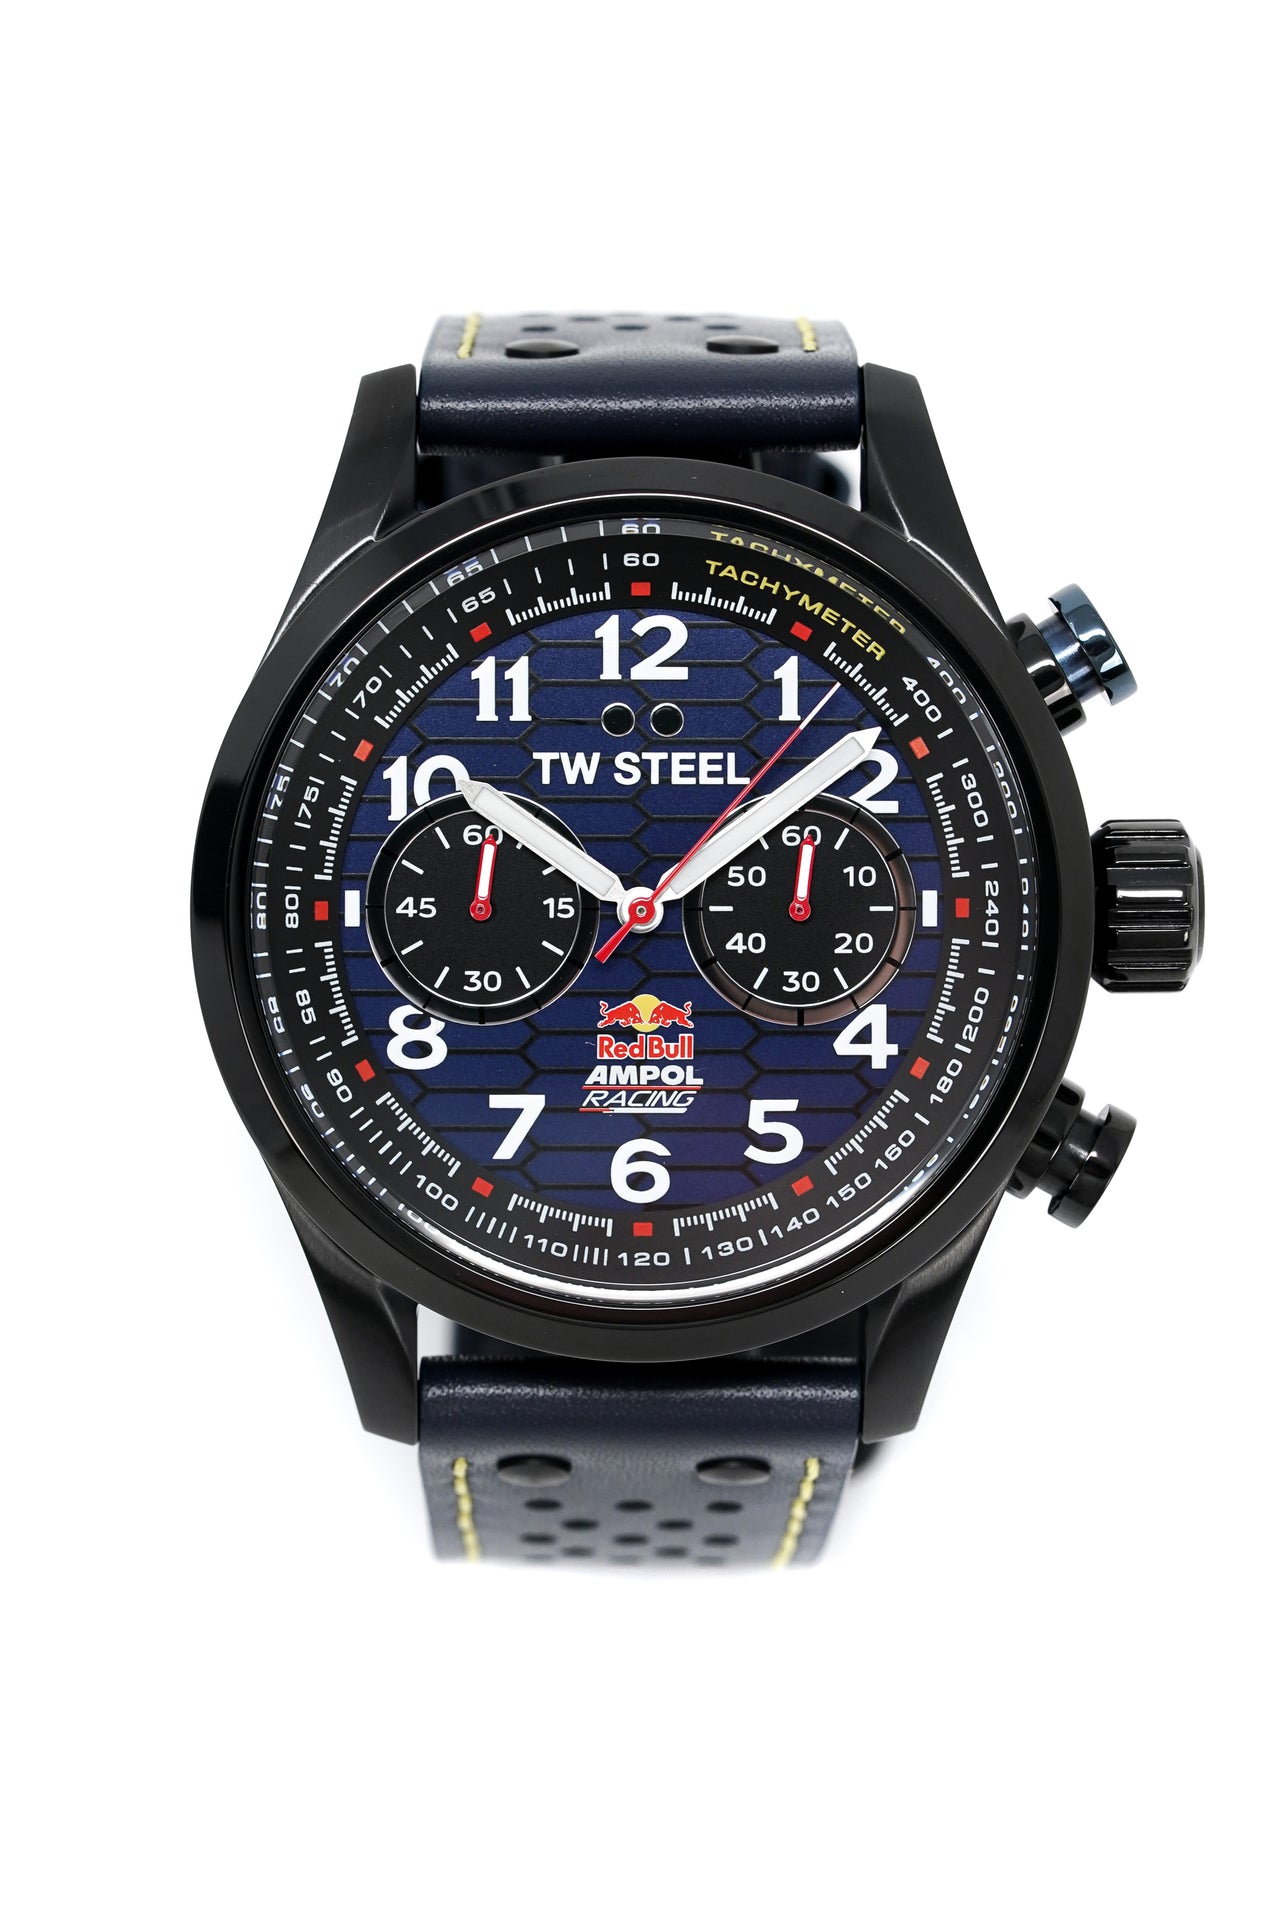 Tag heuer carera red bull edition | Tag heuer watch, Tag heuer, Watches